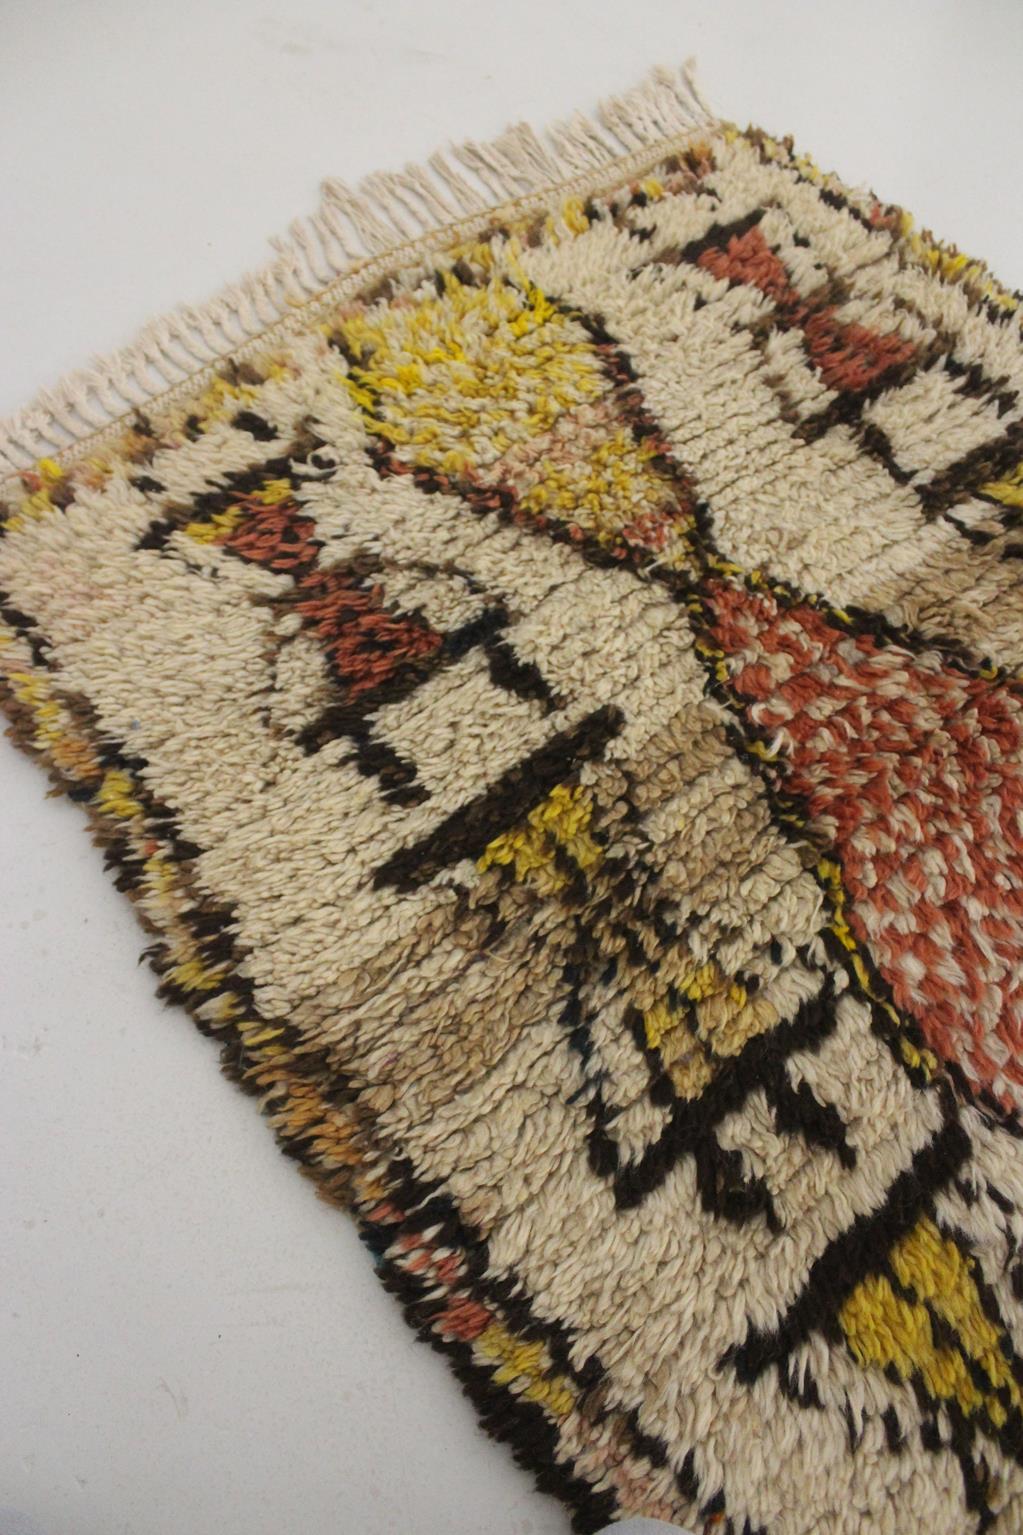 Vintage Moroccan Azilal rug - Beige, yellow, terracotta - 2.7x6.8feet / 84x207cm For Sale 1